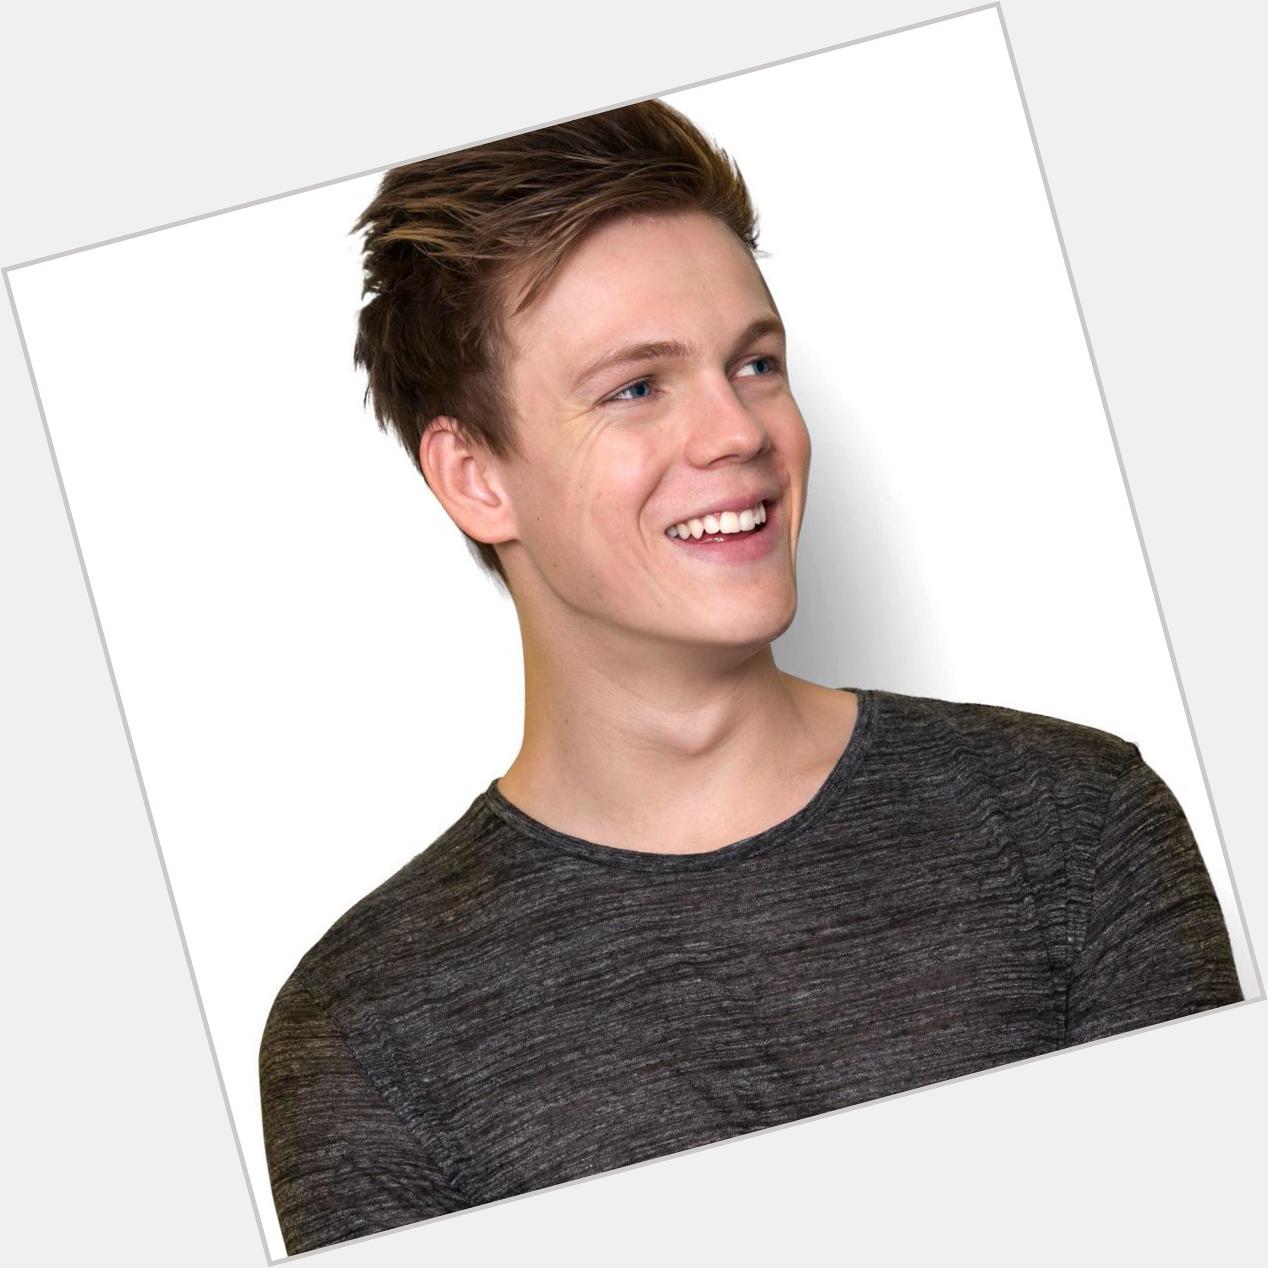 HAPPY BIRTHDAY CASPAR! Drown yourself with pizzas today babe.         